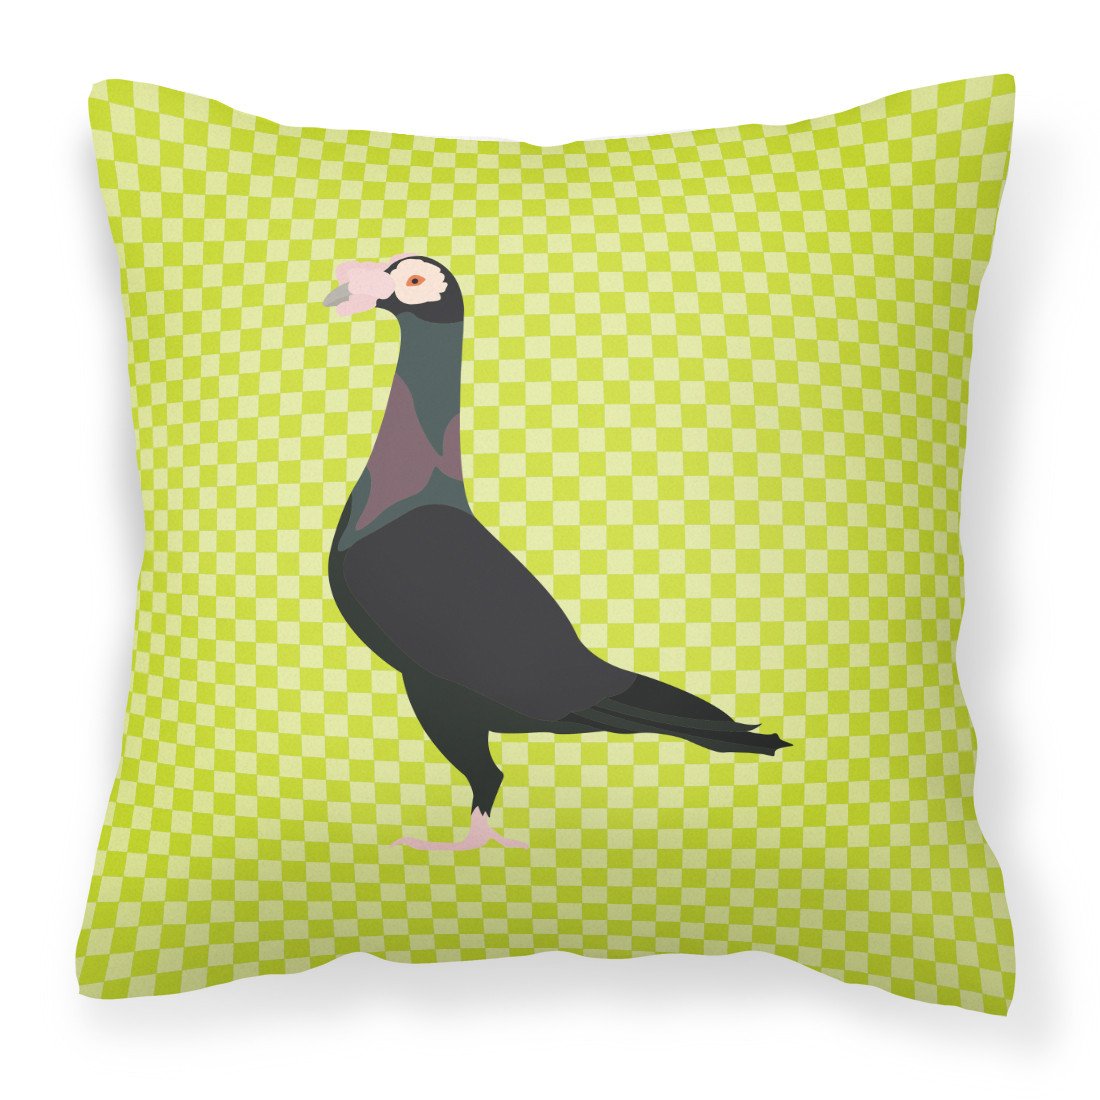 English Carrier Pigeon Green Fabric Decorative Pillow BB7771PW1818 by Caroline's Treasures